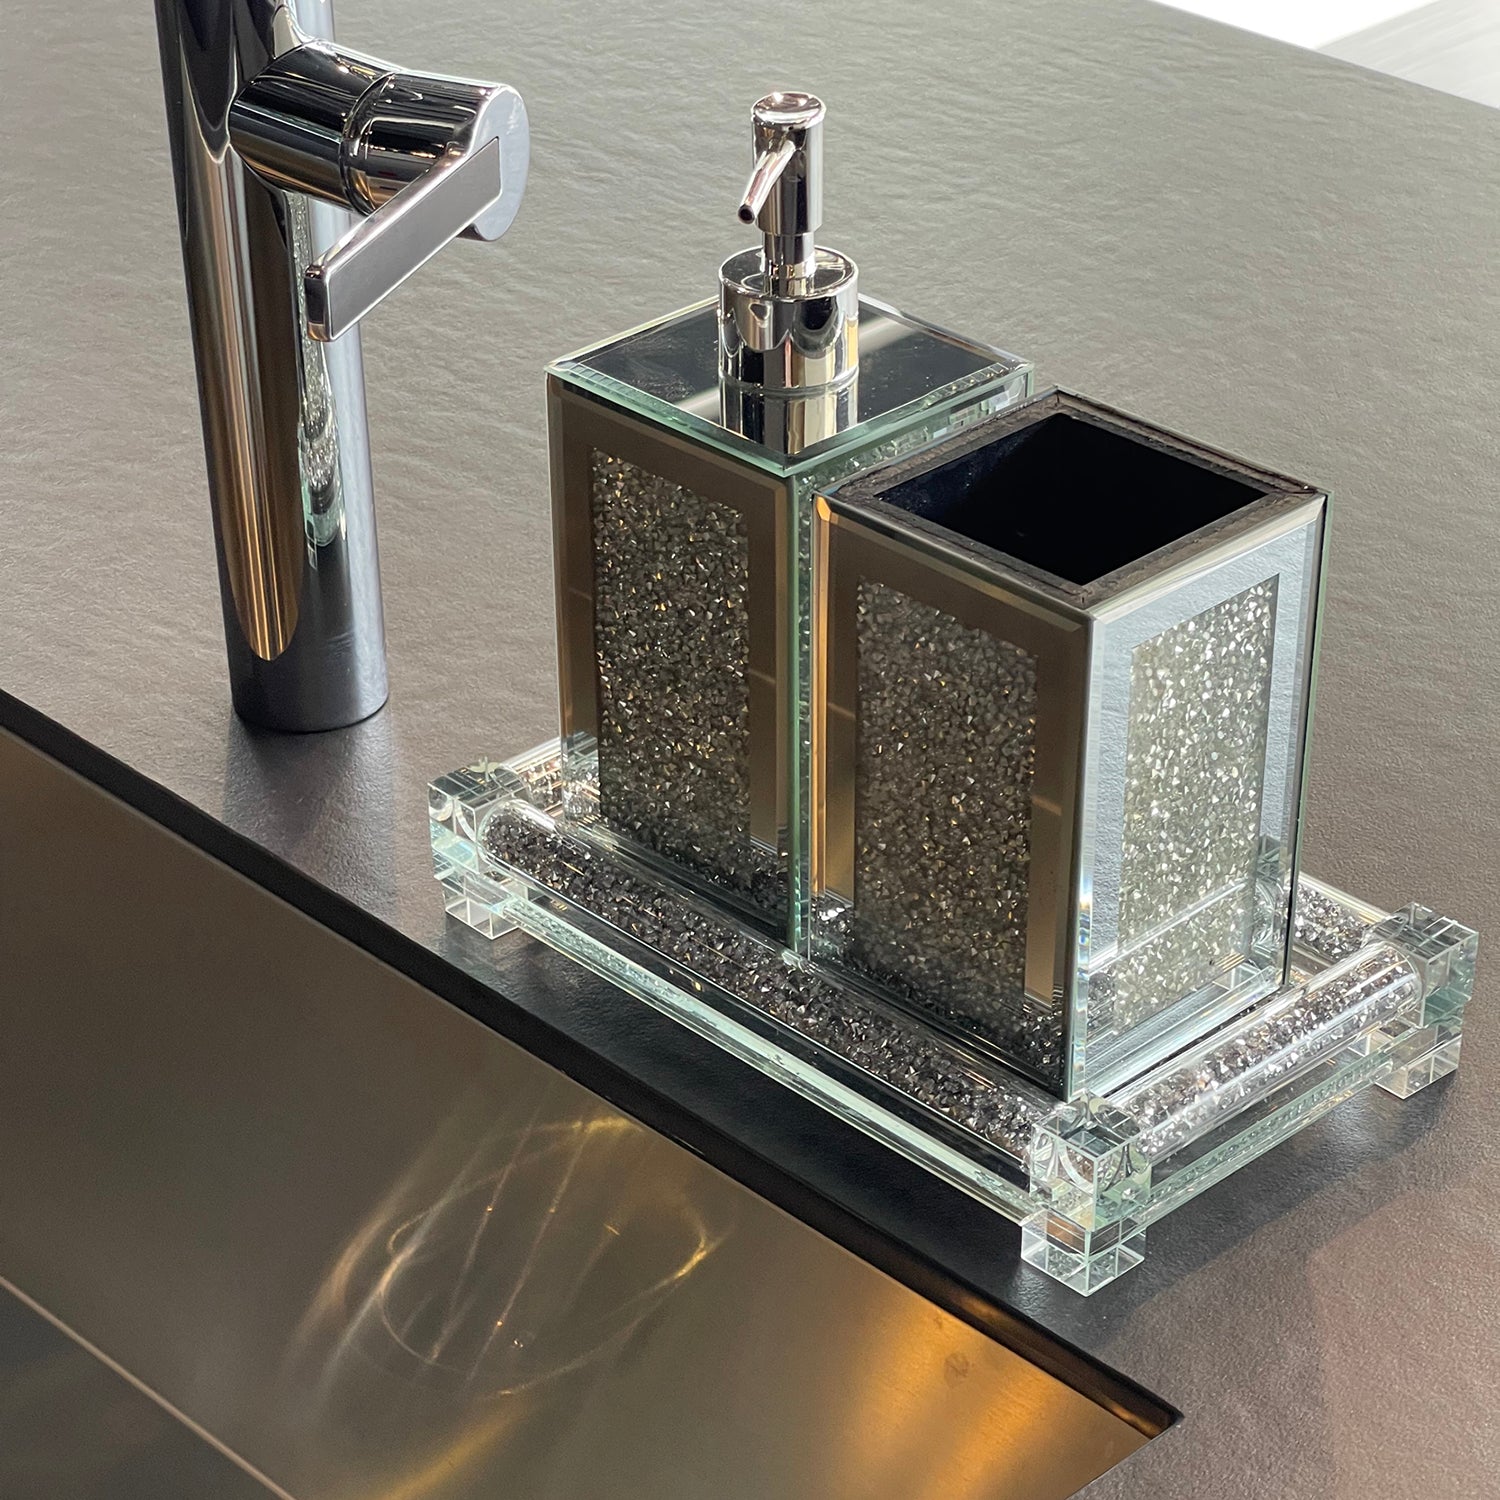 Yodudm Silver Diamond Bathroom Accessories Set, 3 Piece Bathroom Accessory  Decor Sets Fills with Crushed Diamond Crystals Luxury for Home Decor,  Includes Soap Dispenser, Toothbrush Holder, Soap Dish 